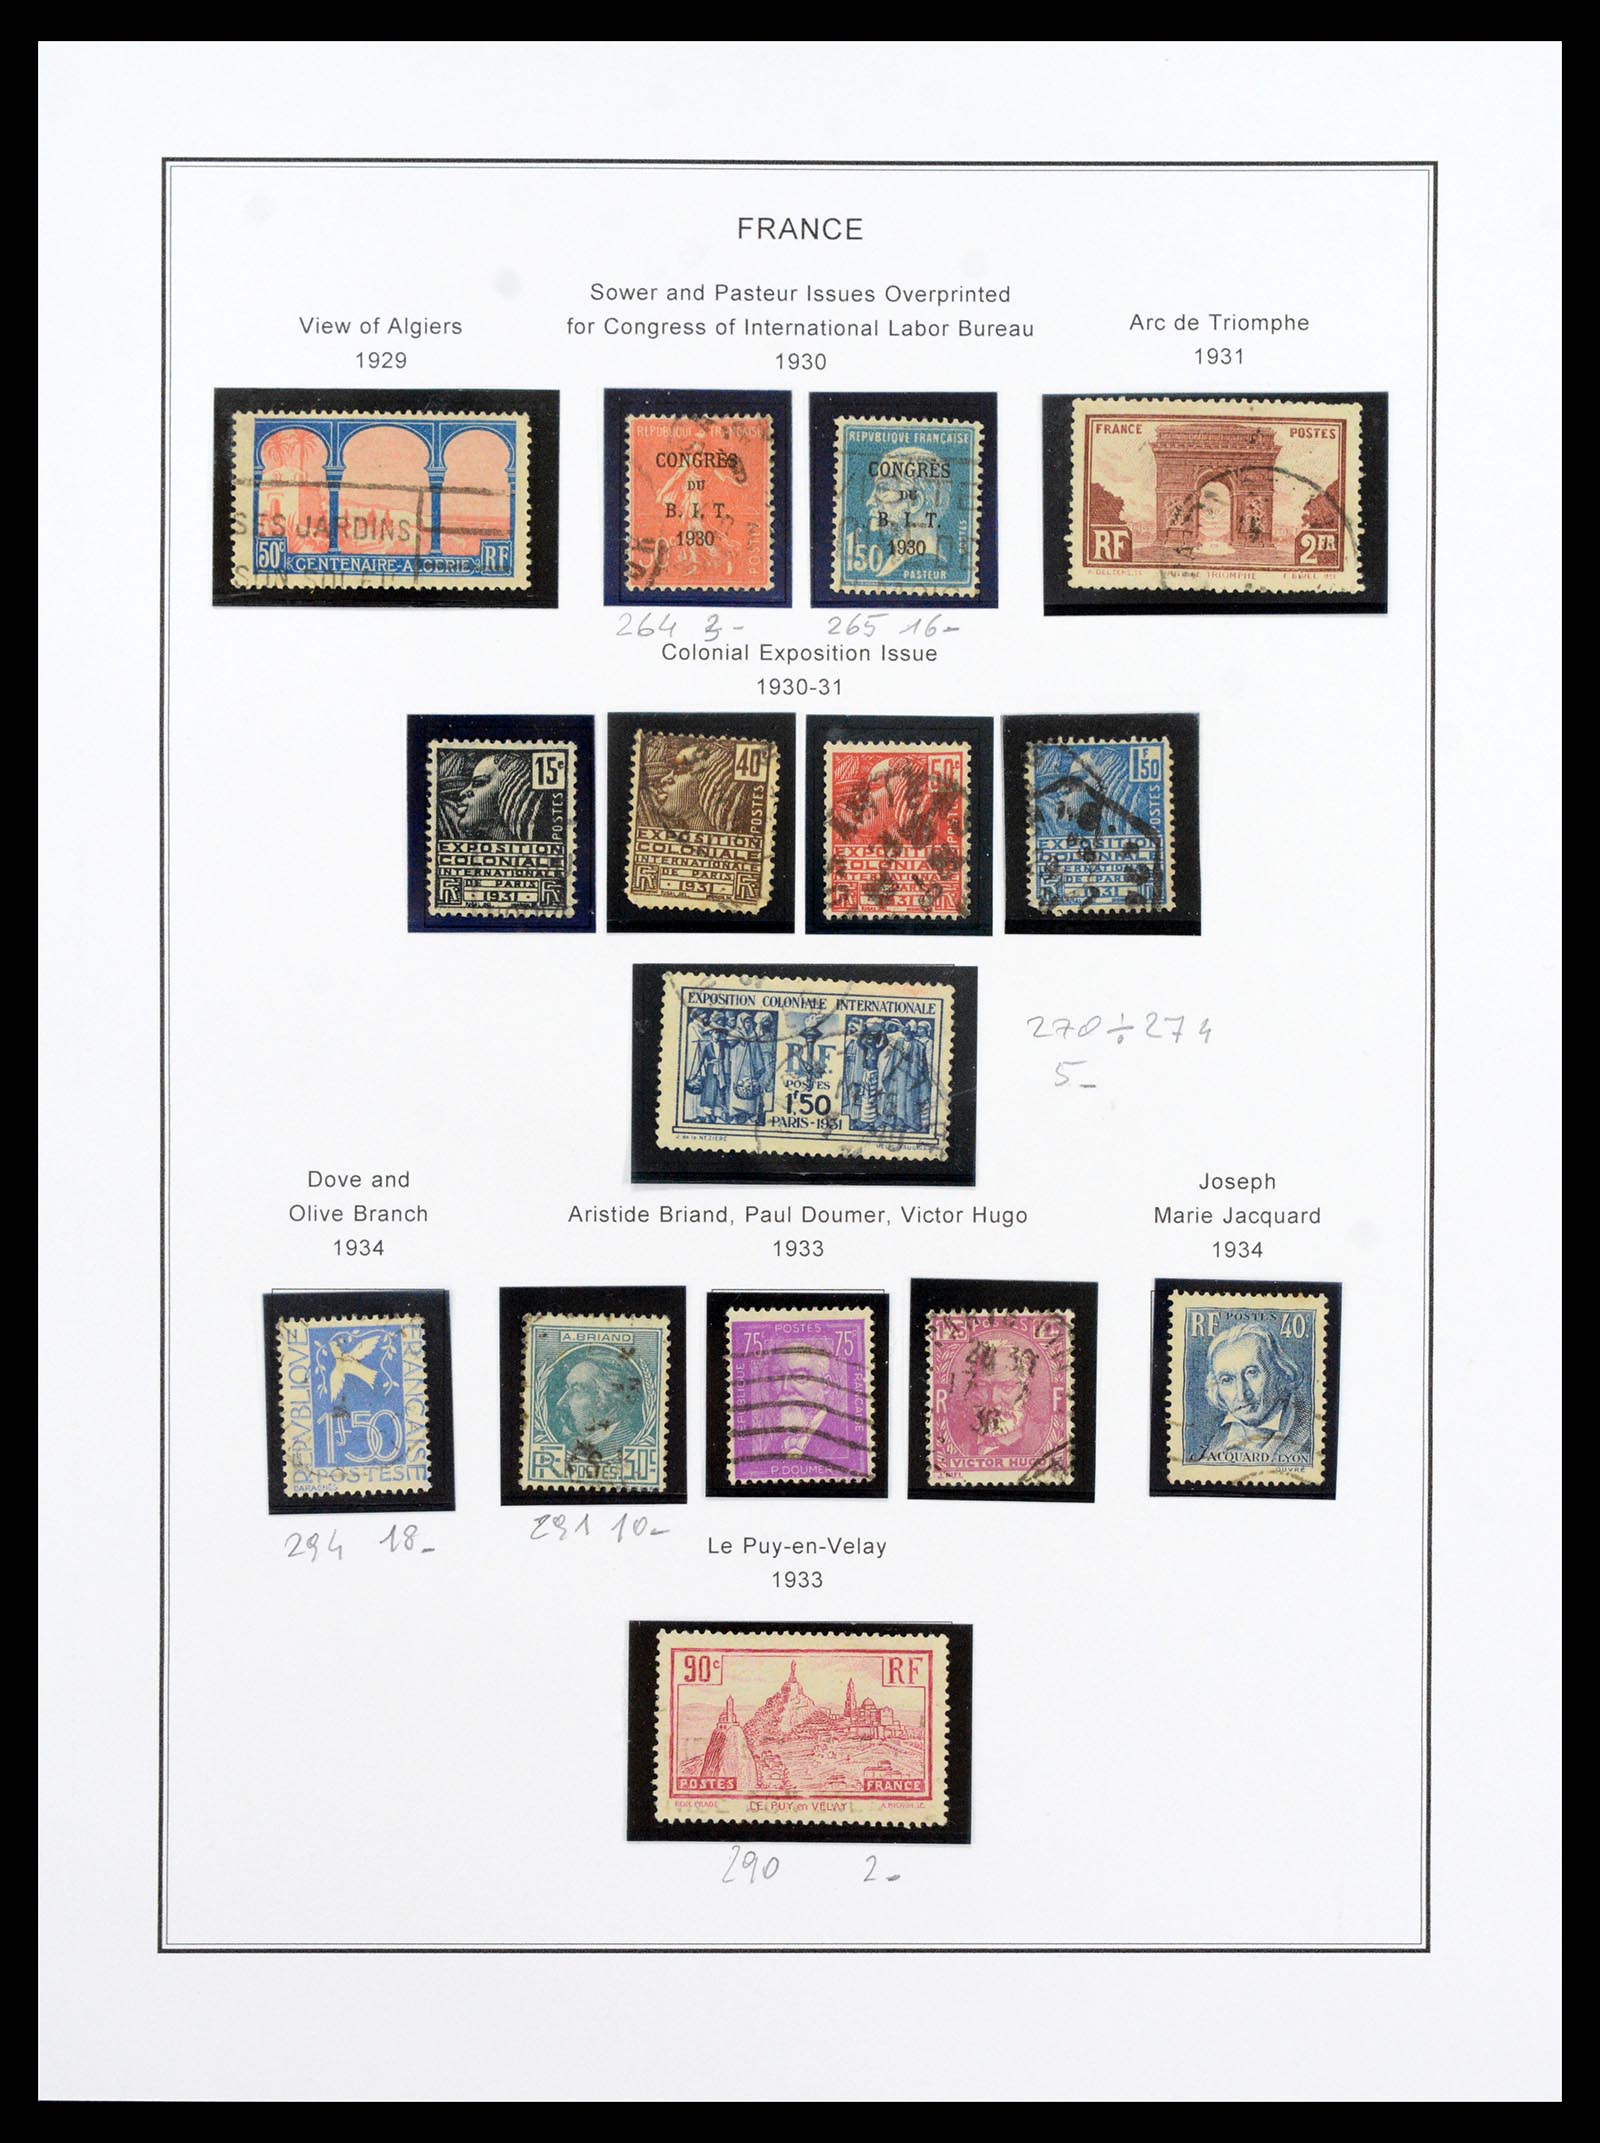 37913 022 - Stamp Collection 37913 France 1849-2000.